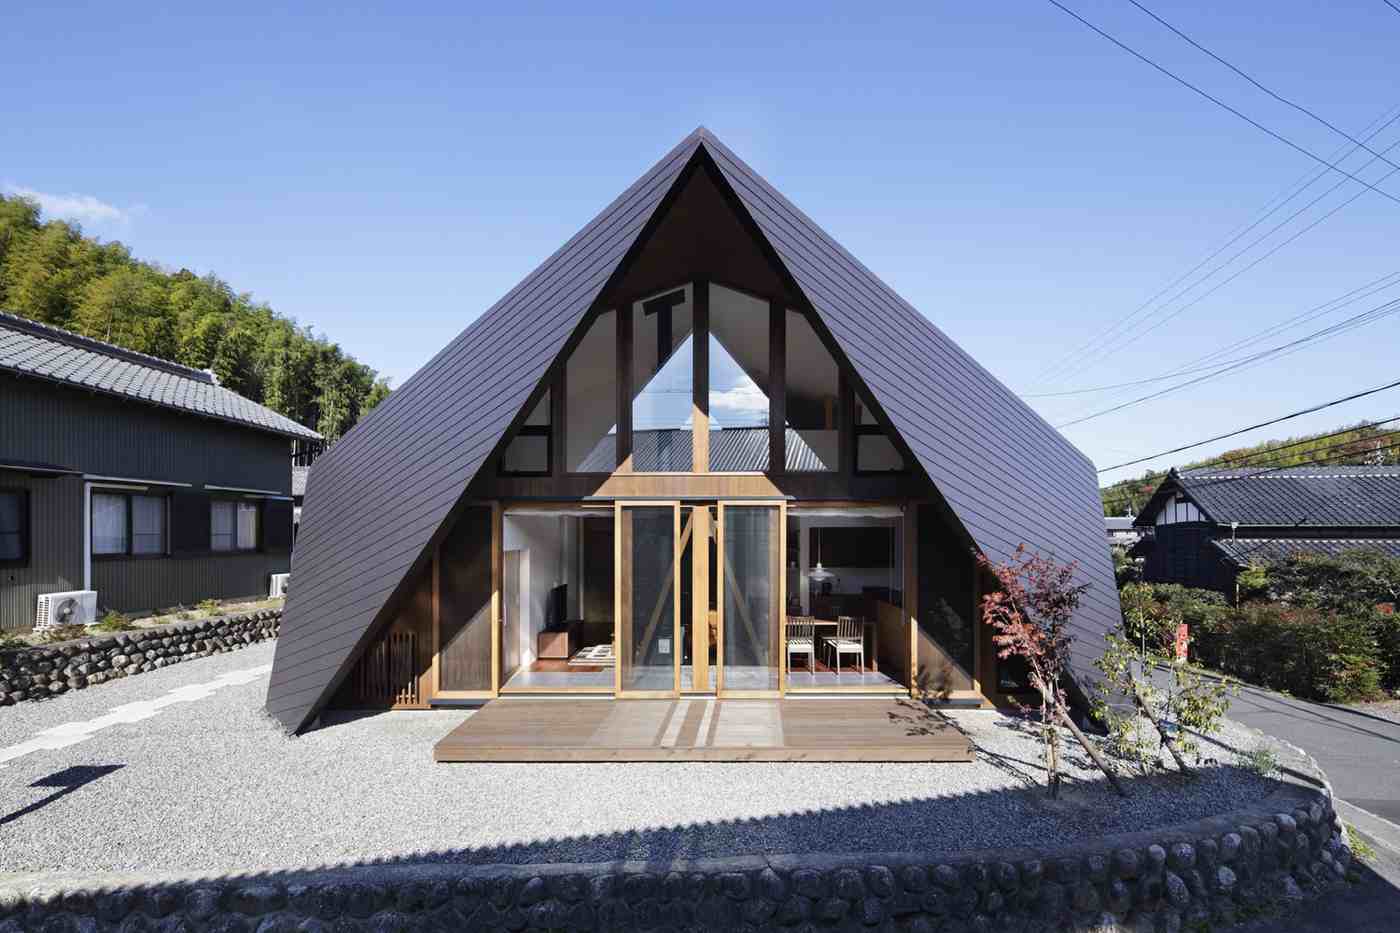 Saddle roof house with modern construction Example for a covered terrace with search protection and sun protection on two floors